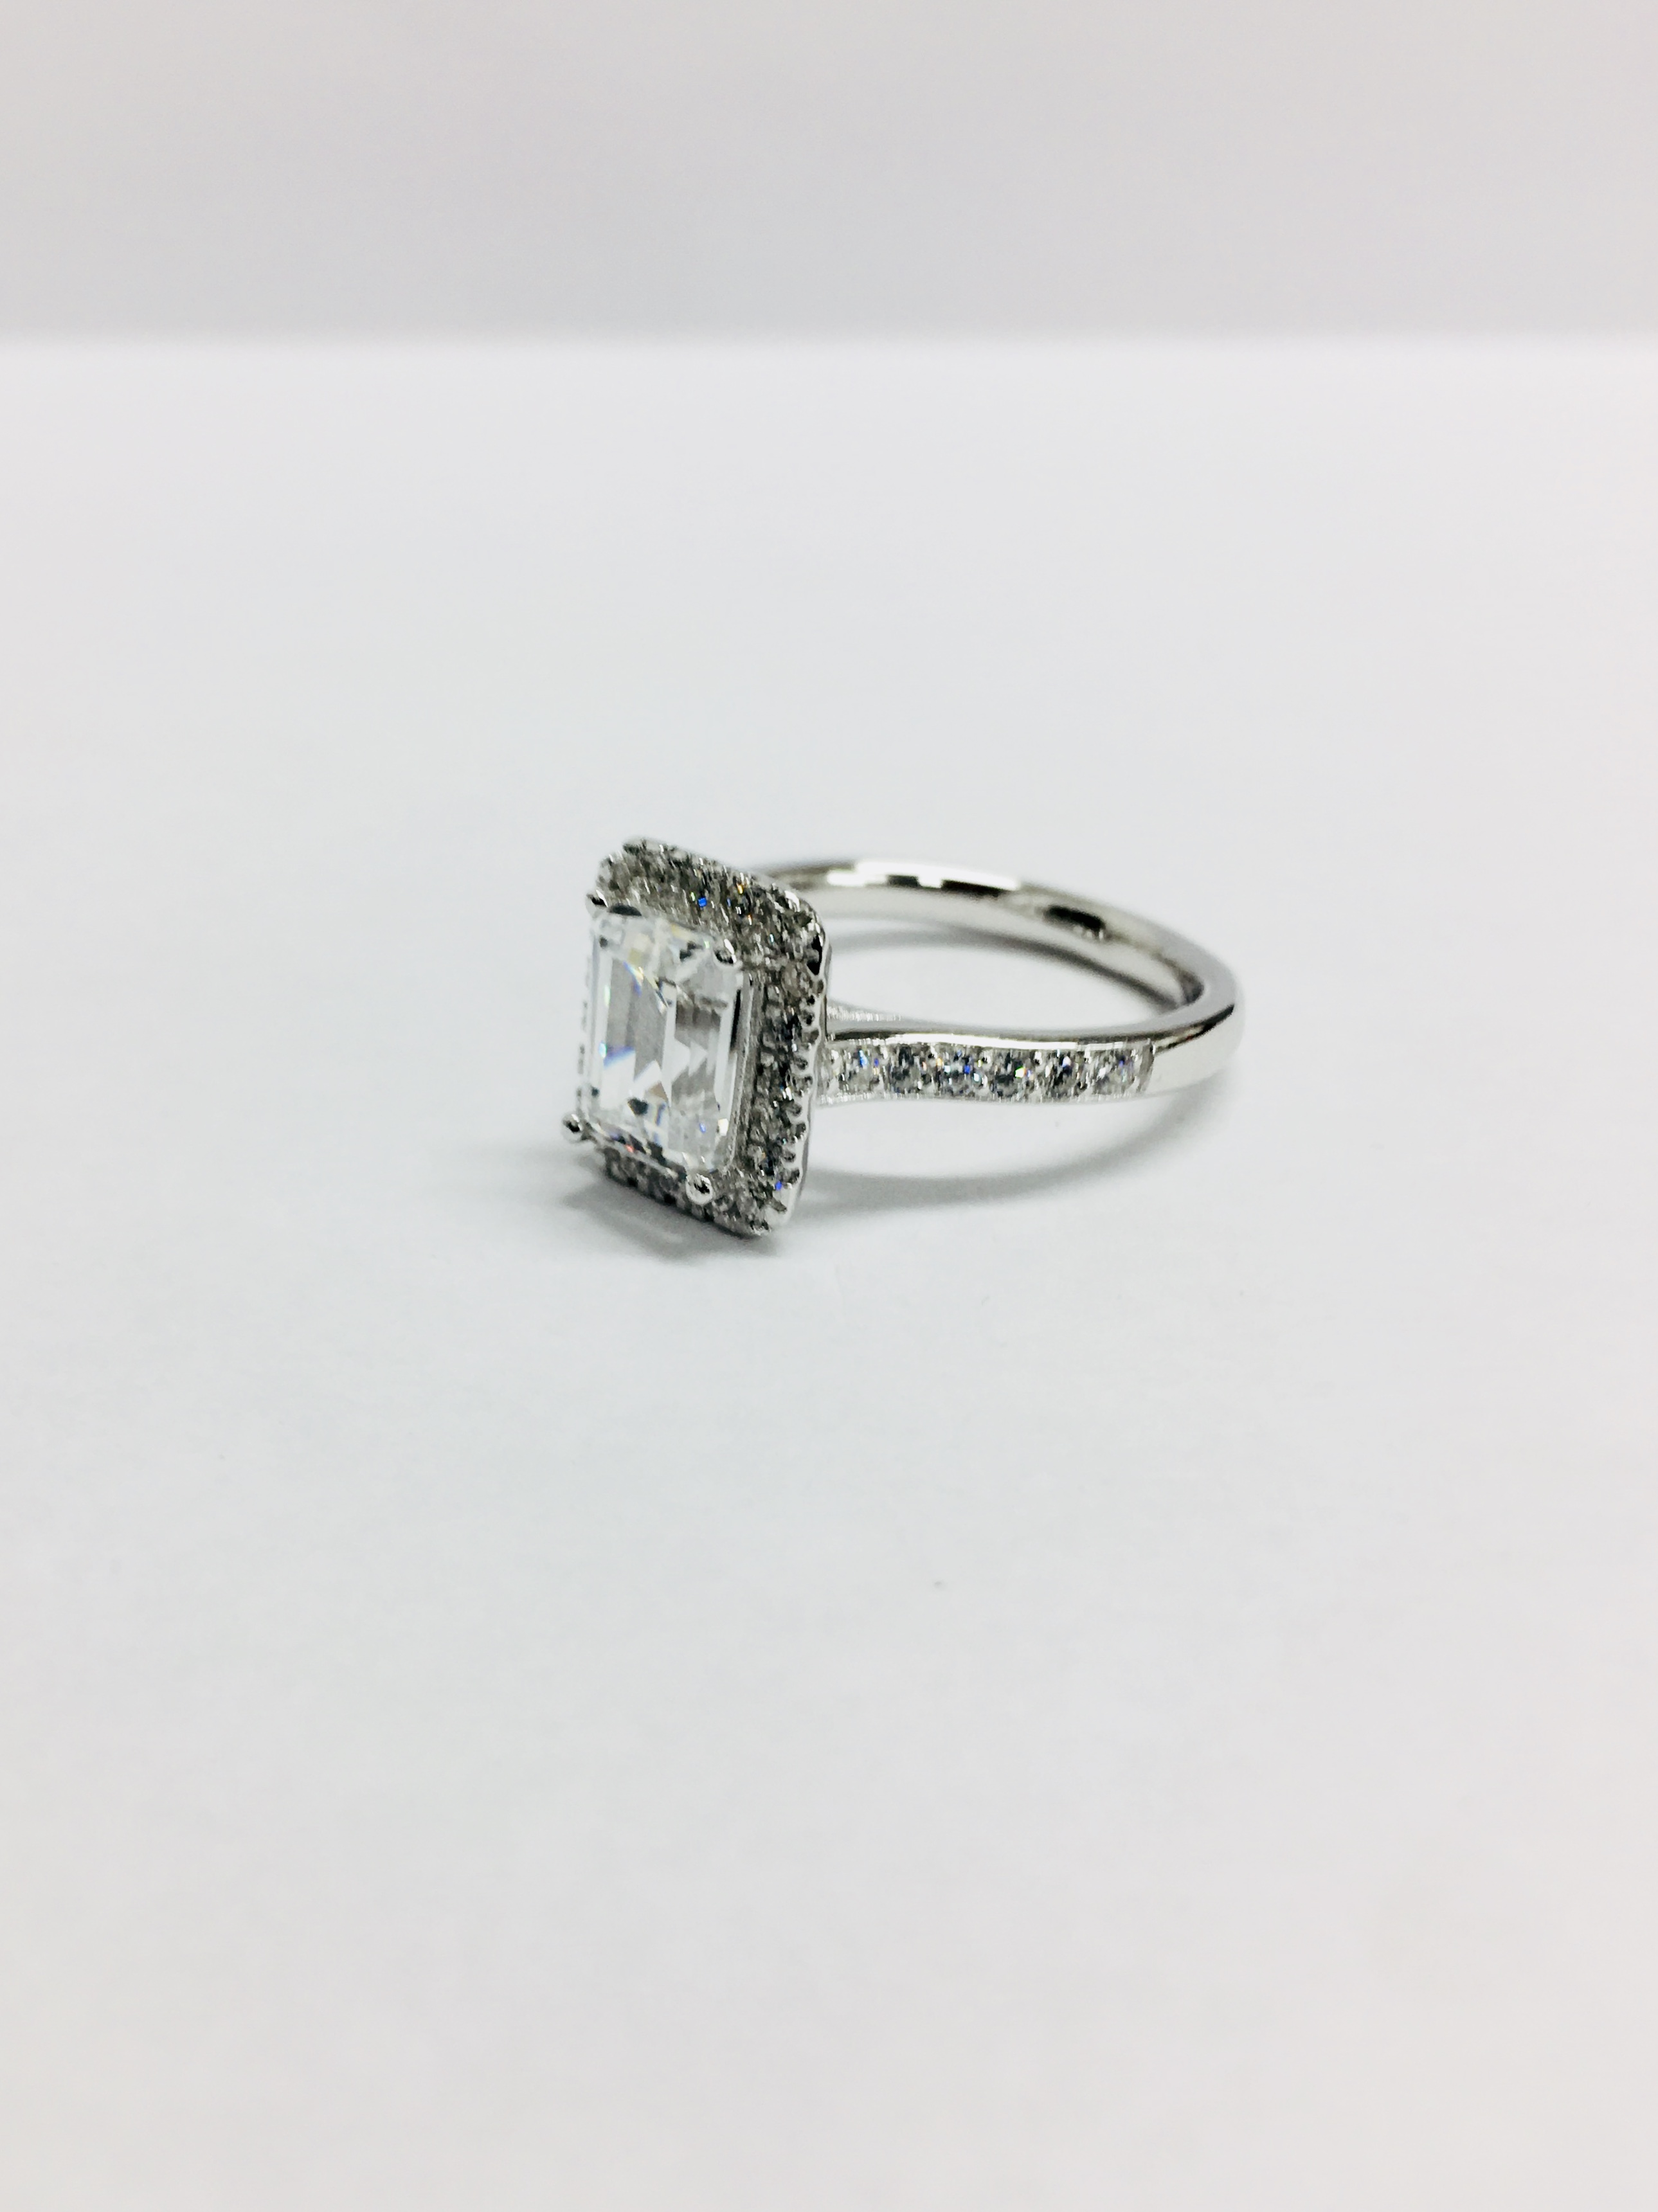 1.2ct diamond solitaire ring set with an emerald cut diamond - Image 3 of 8